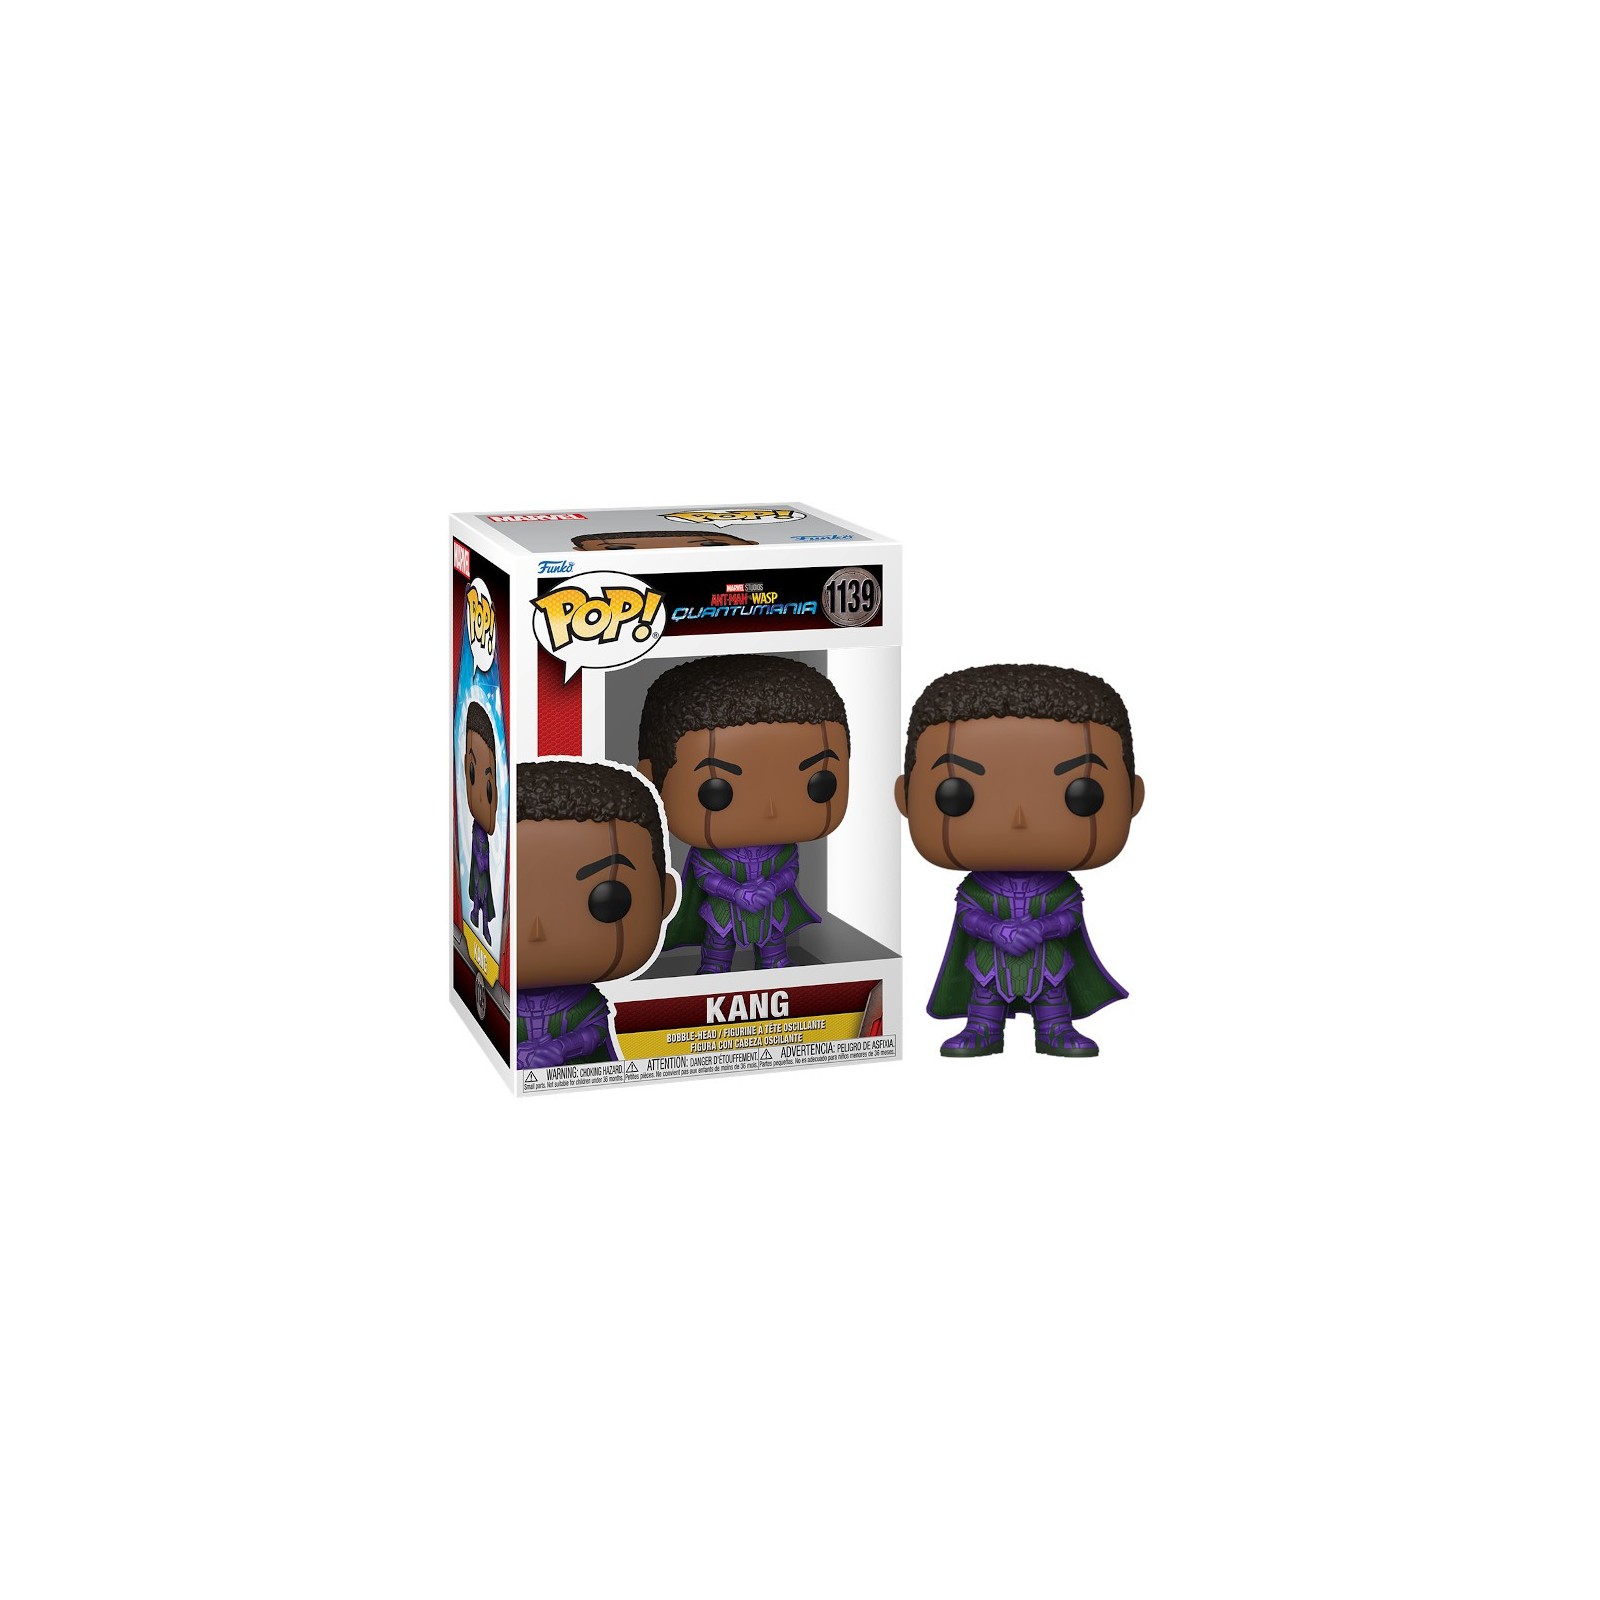 FUNKO POP! ANT-MAN AND THE WASP QUANTUMANIA: KANG (1139)